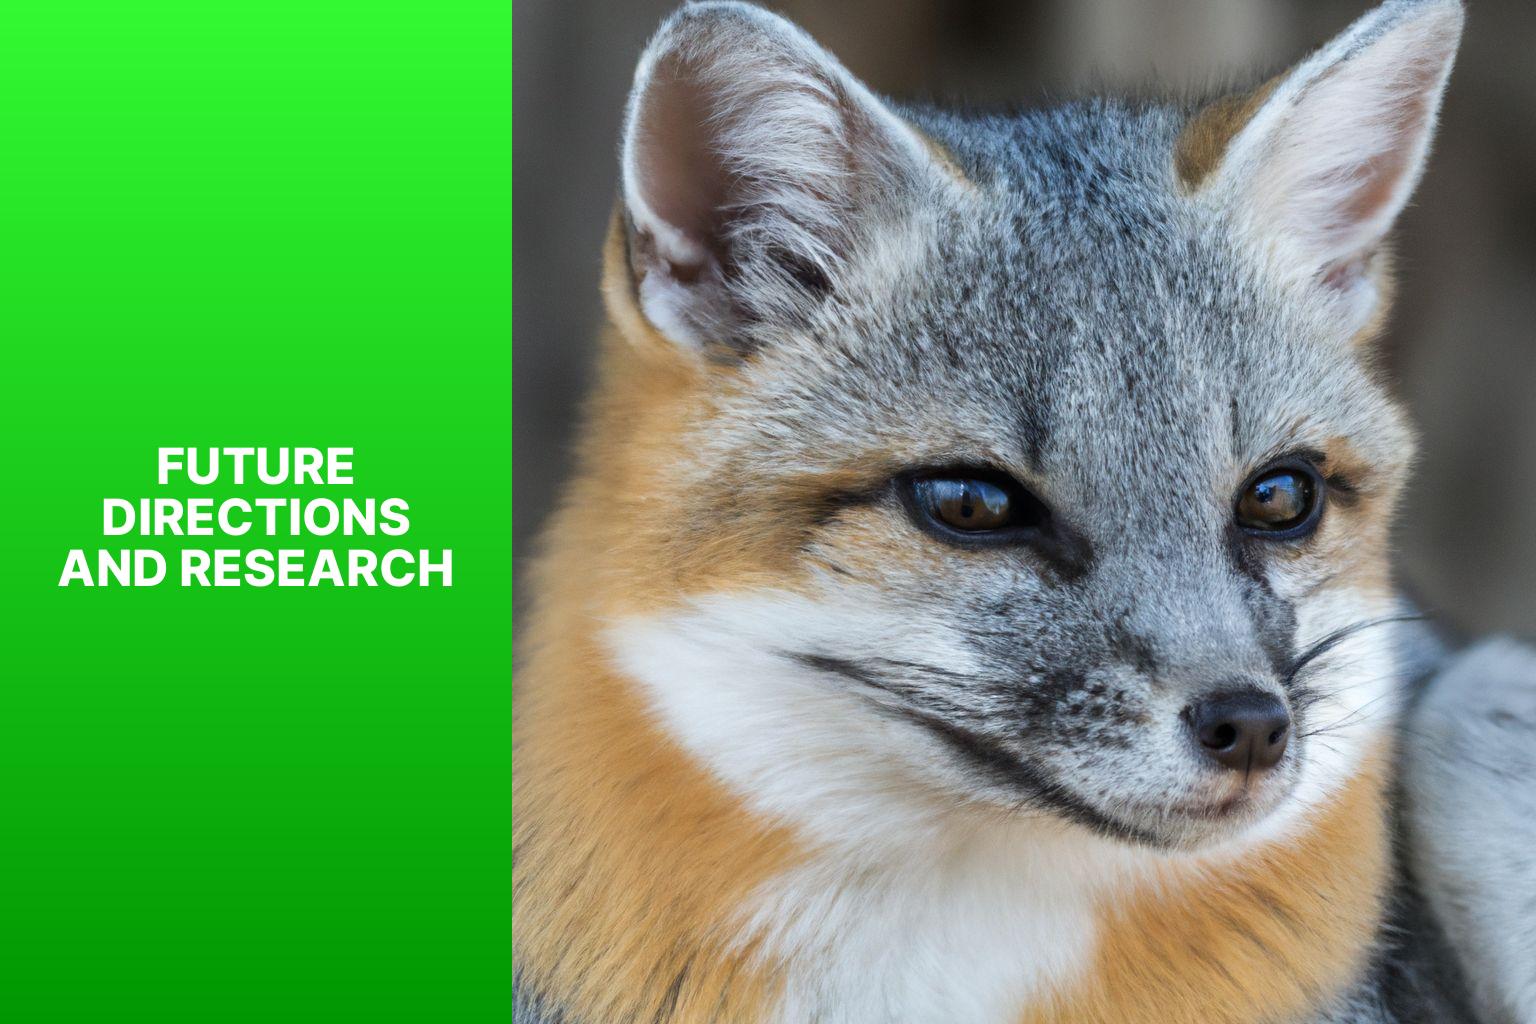 Future Directions and Research - Island Fox in Captivity 